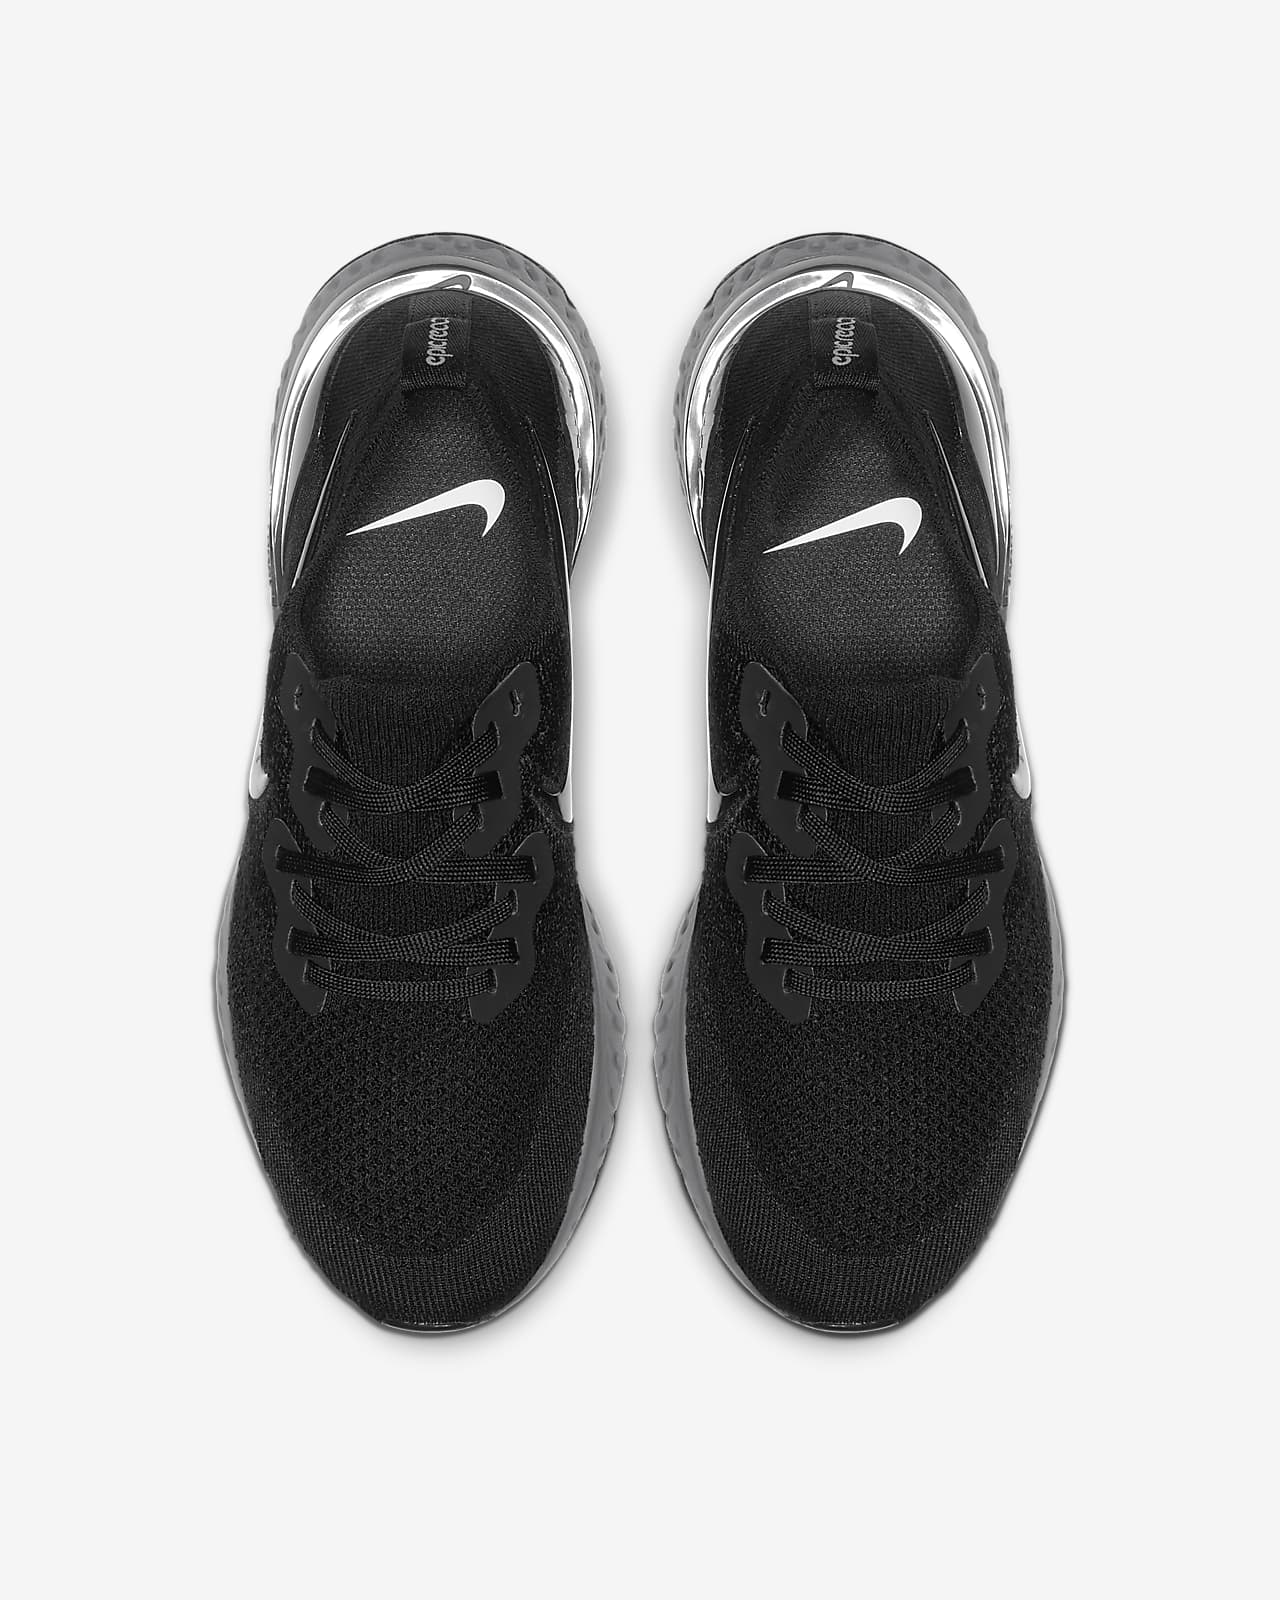 epic react flyknit running shoes black